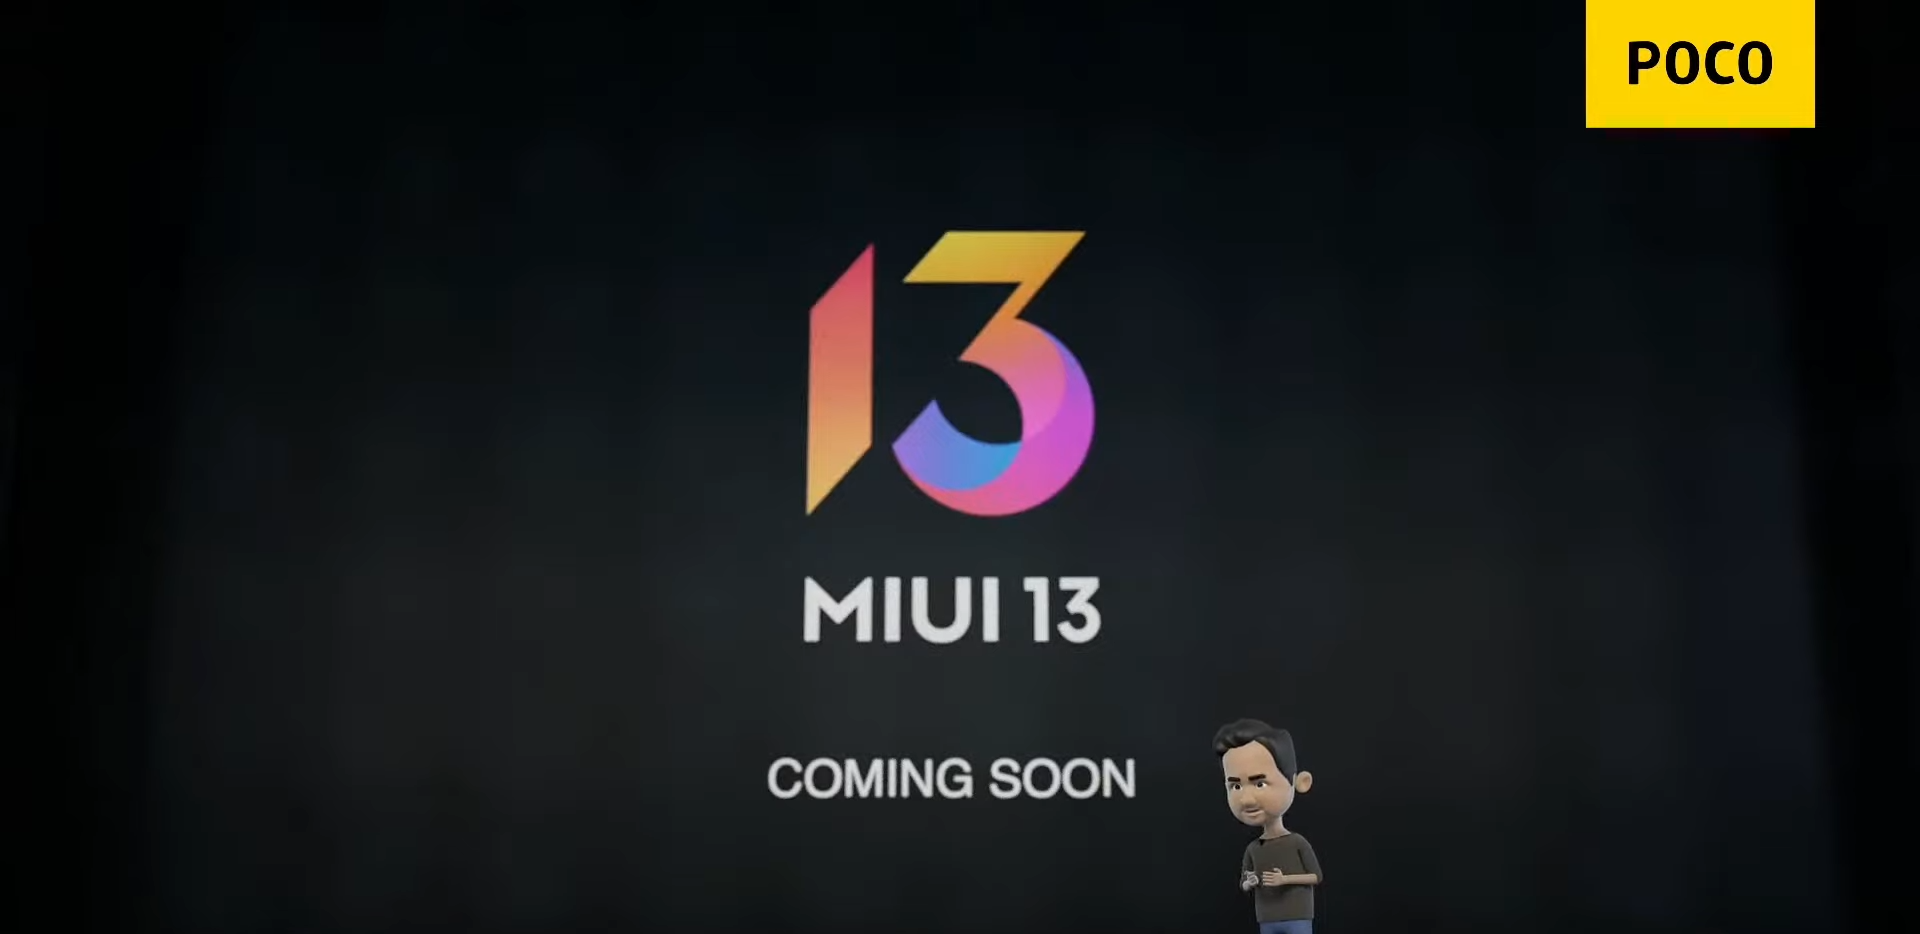 Xiaomi has announced which POCO smartphones will be the first to update to MIUI 13